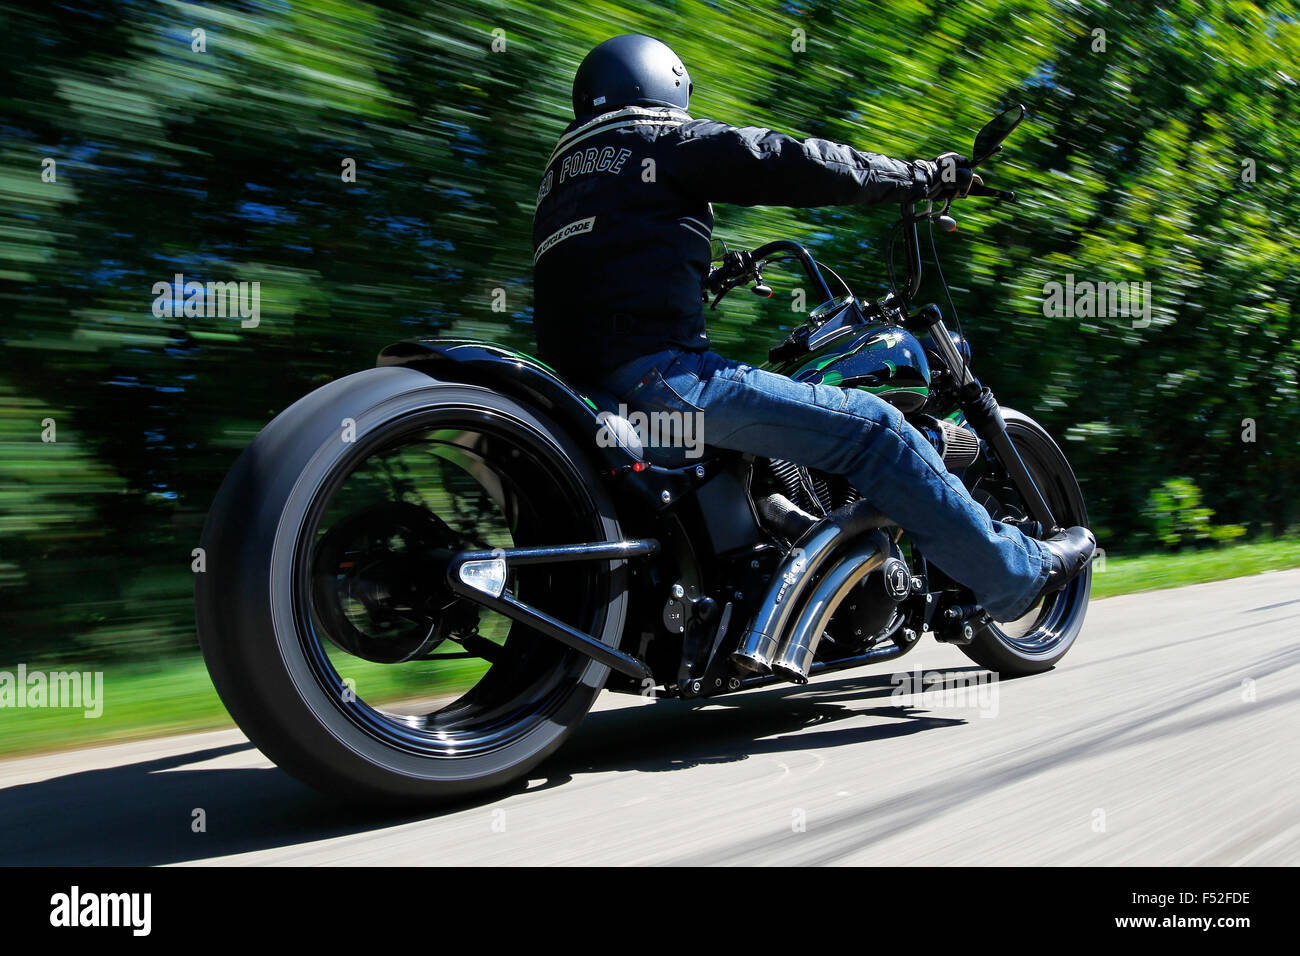 Motorcycle, mood bike, chopper, country road, trees, Custom bike on Harley Basis, year of construction in 2011, extremely wide rear tire, Stock Photo